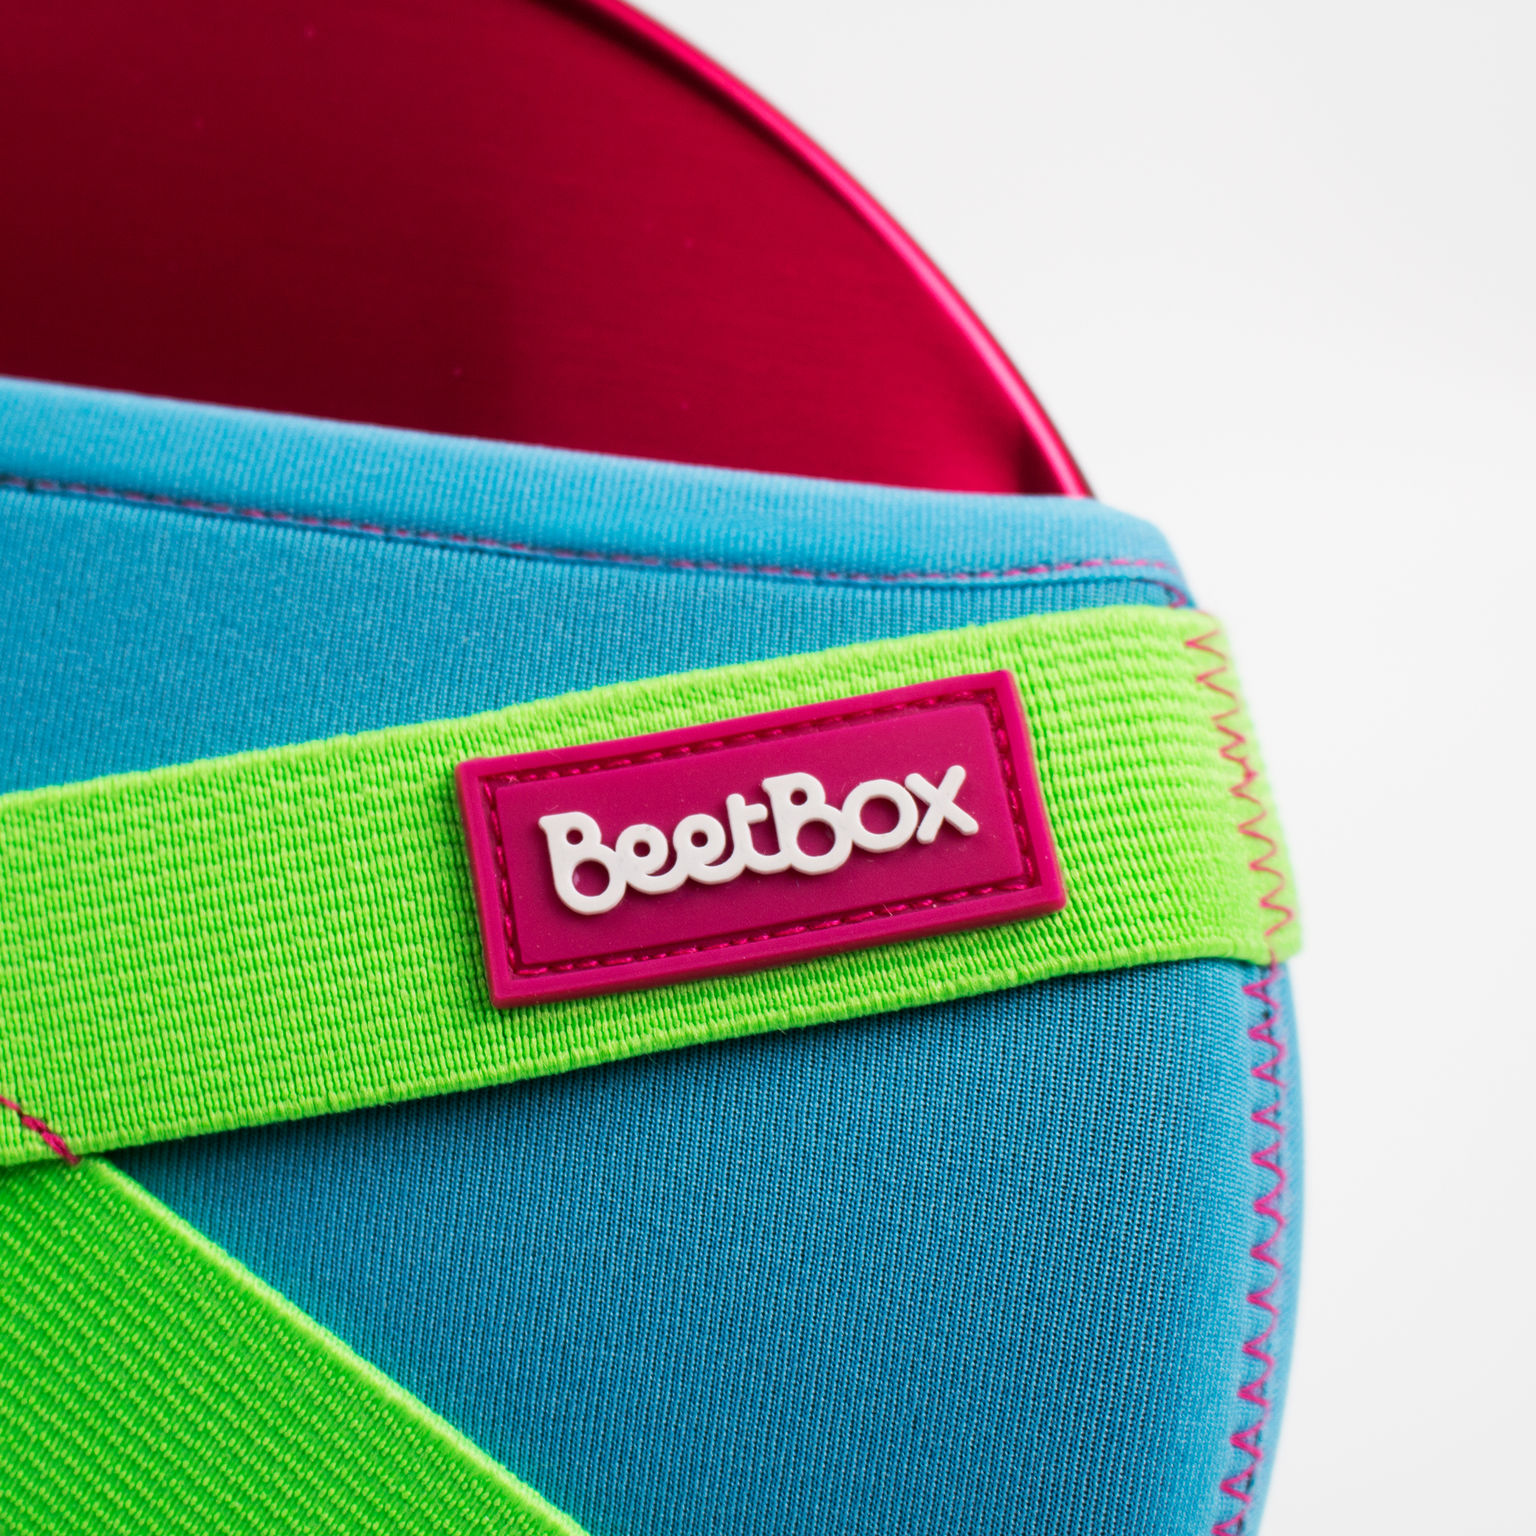 BeetBox - the first portable Glass Lunch Bowl